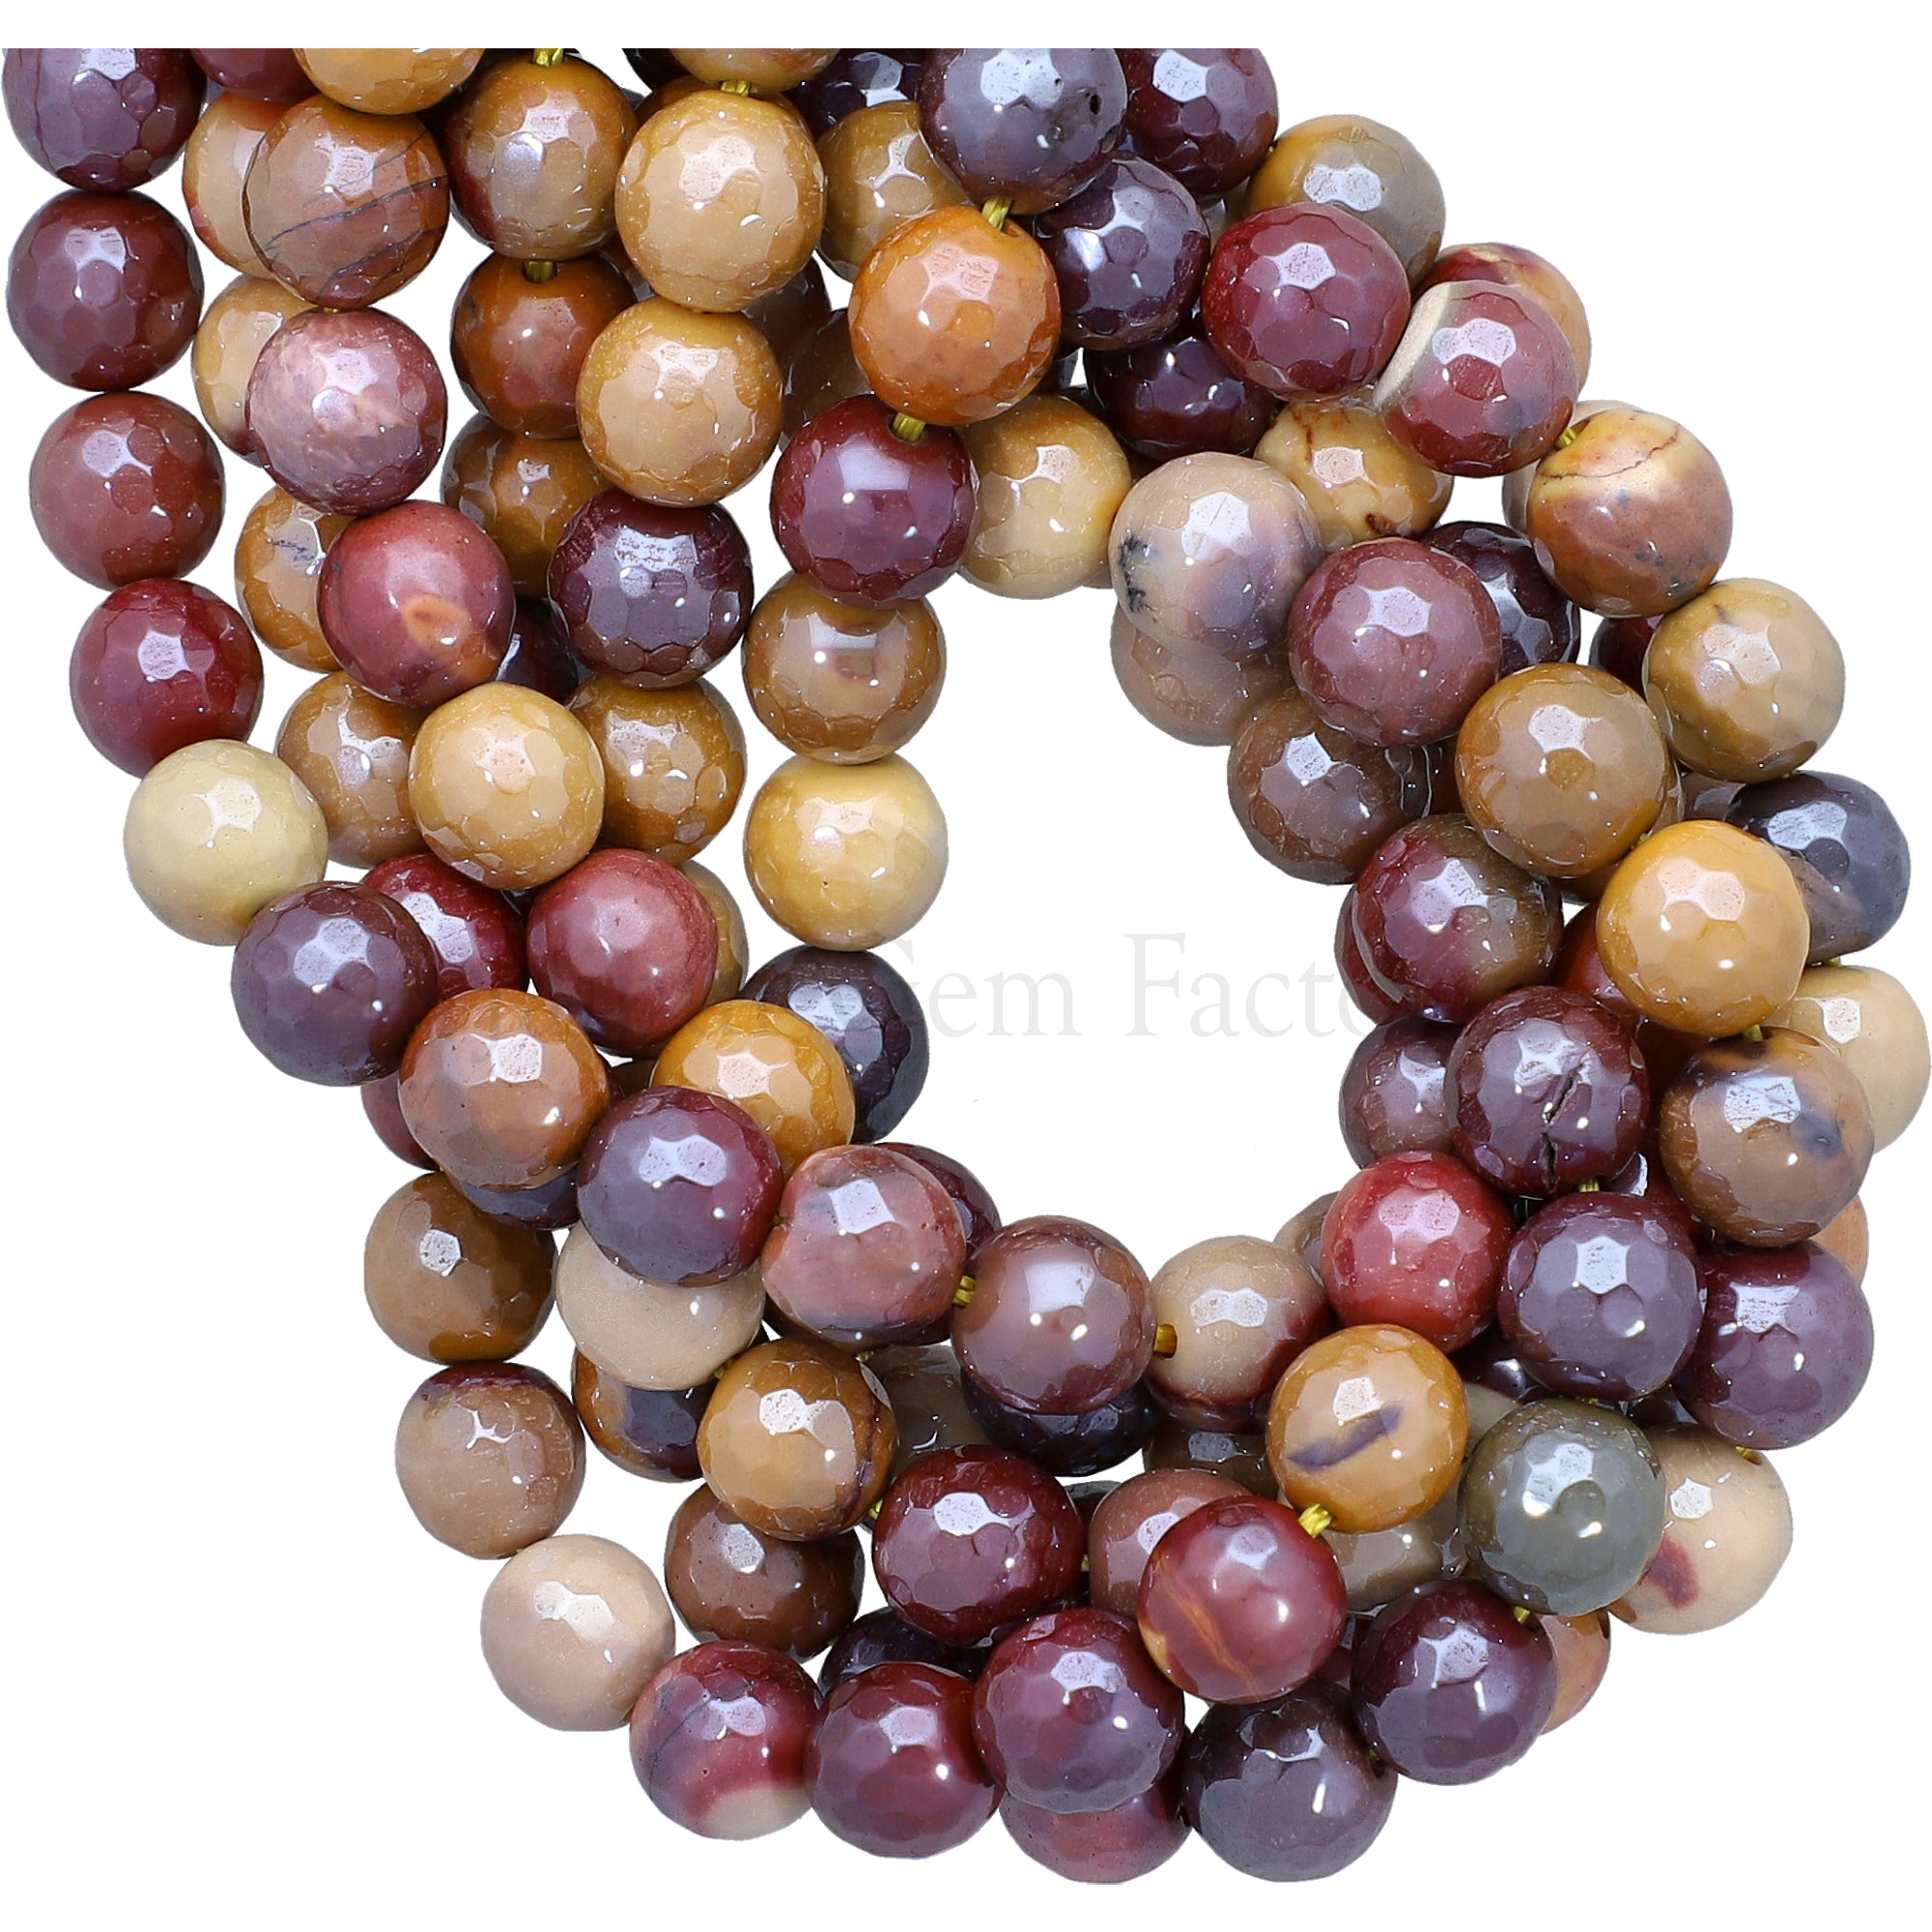 8 MM Mystic Coated Mookaite Faceted Round Beads 15 Inches Strand